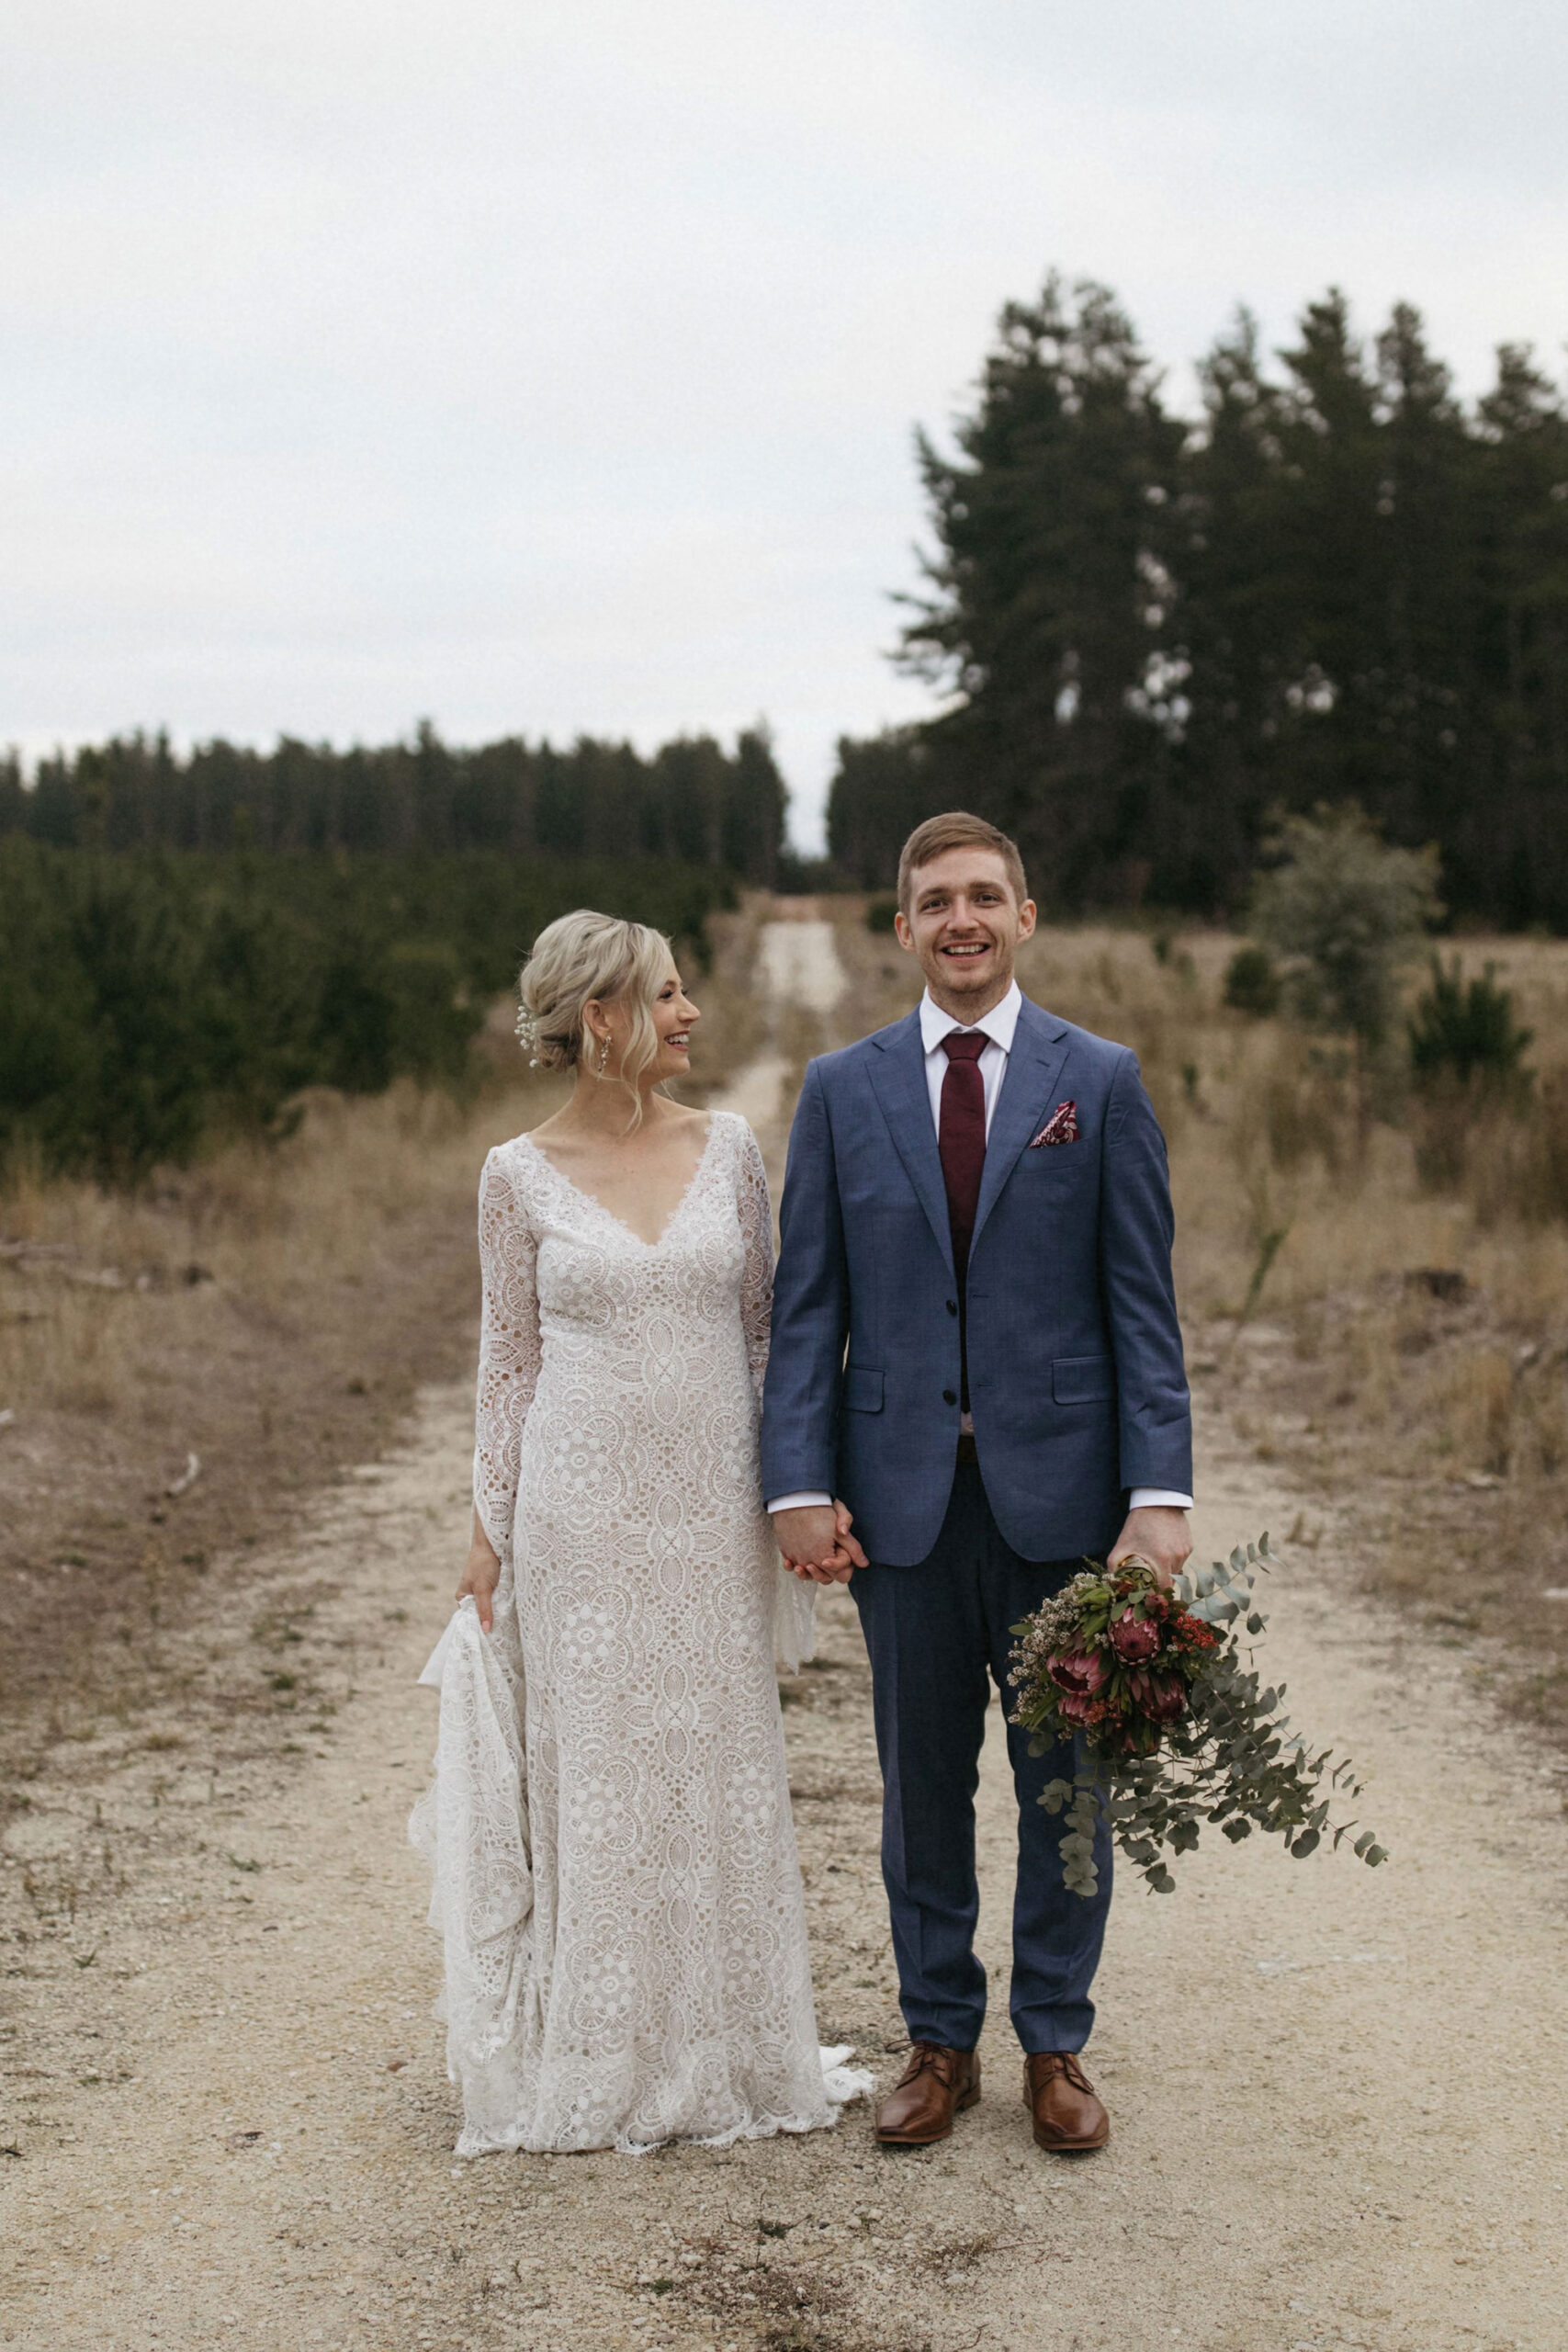 Bec Shaan Forest Country Wedding Dan Evans Photography SBS 032 scaled